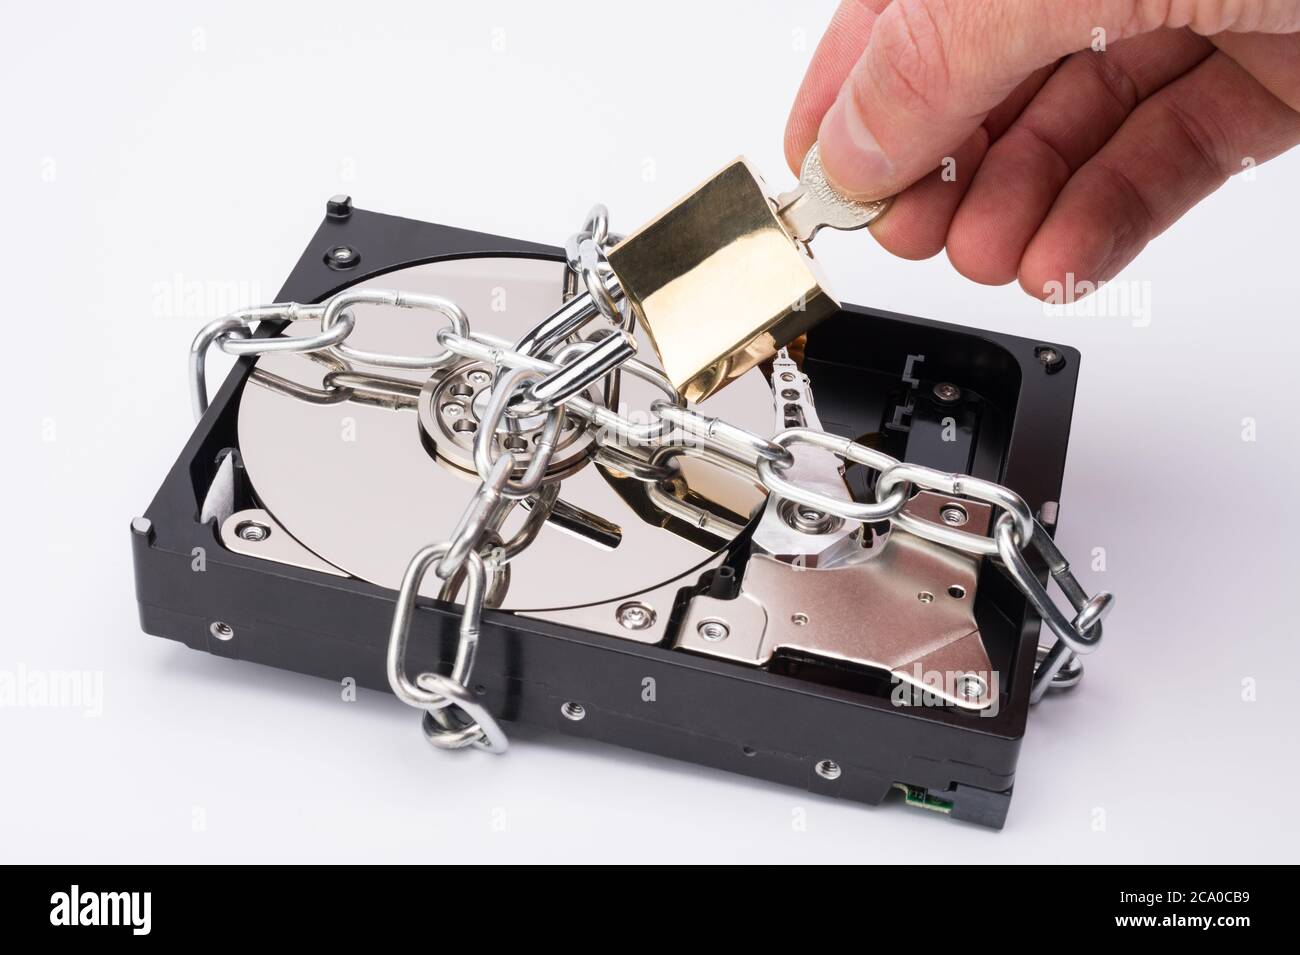 A 3.5' hard disk drive (HDD) secured by a chain with a man's hand unlocking the padlock. Stock Photo